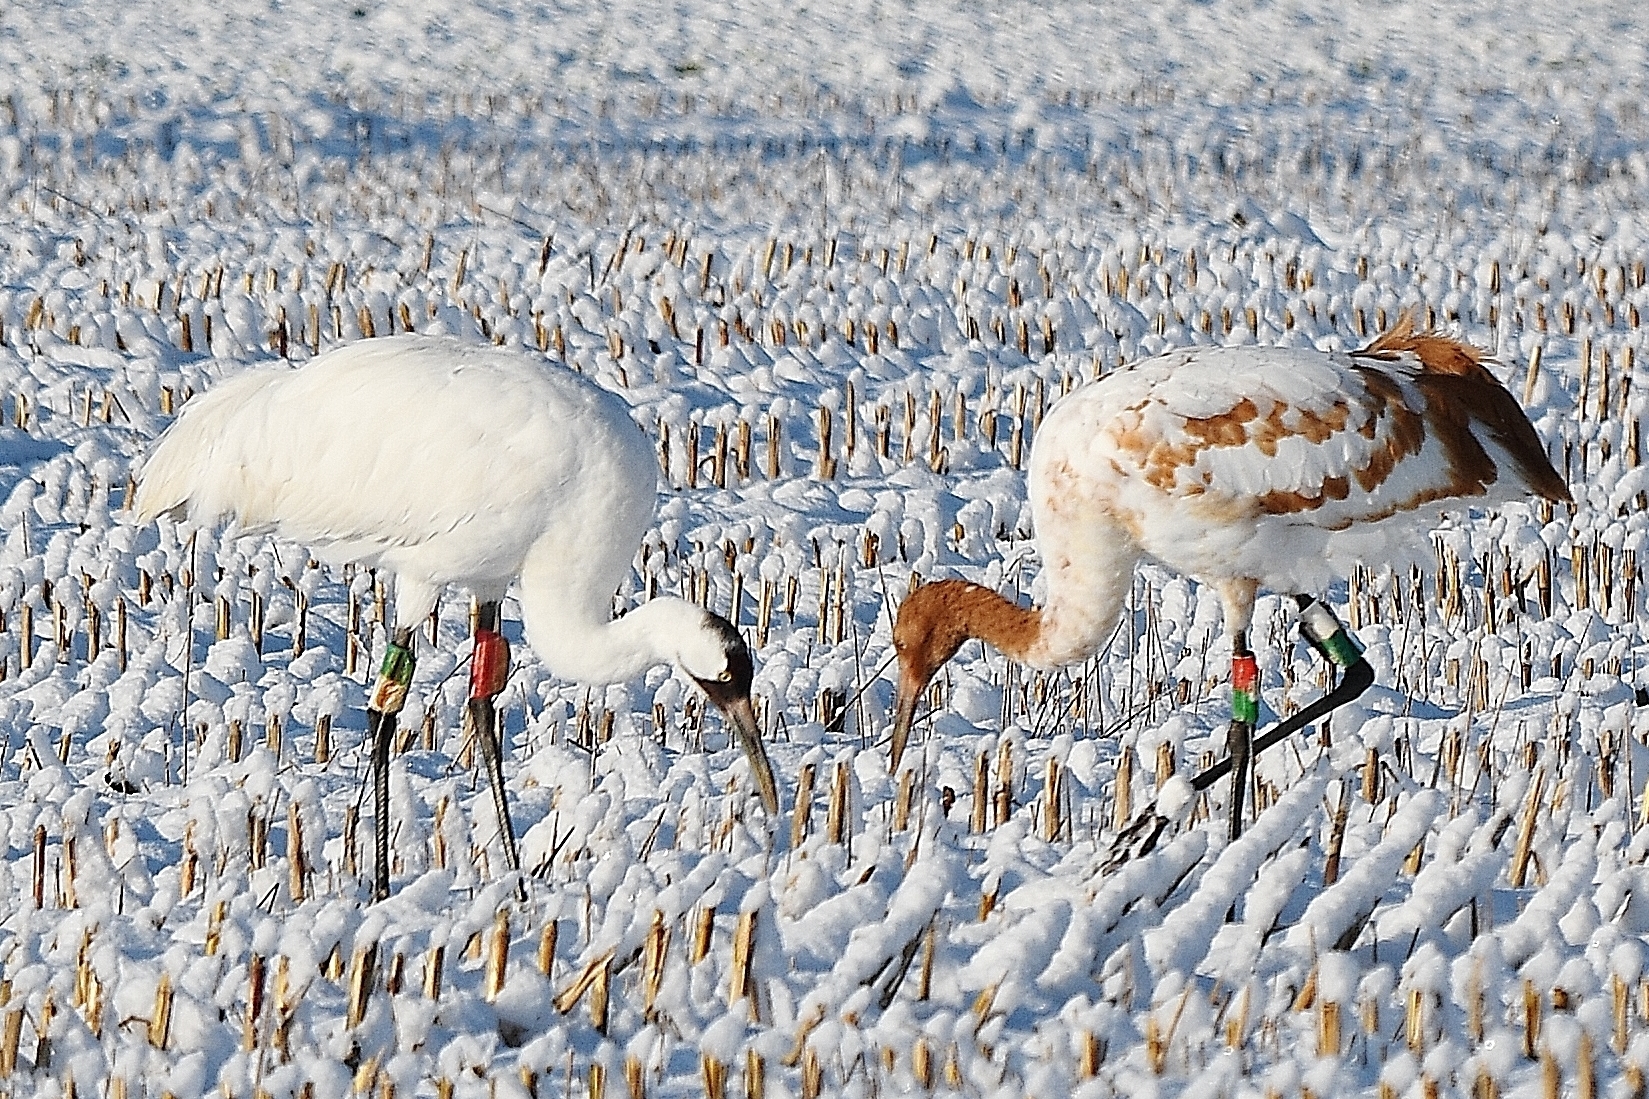 One juvenile and one adult whooping crane foraging in the snow